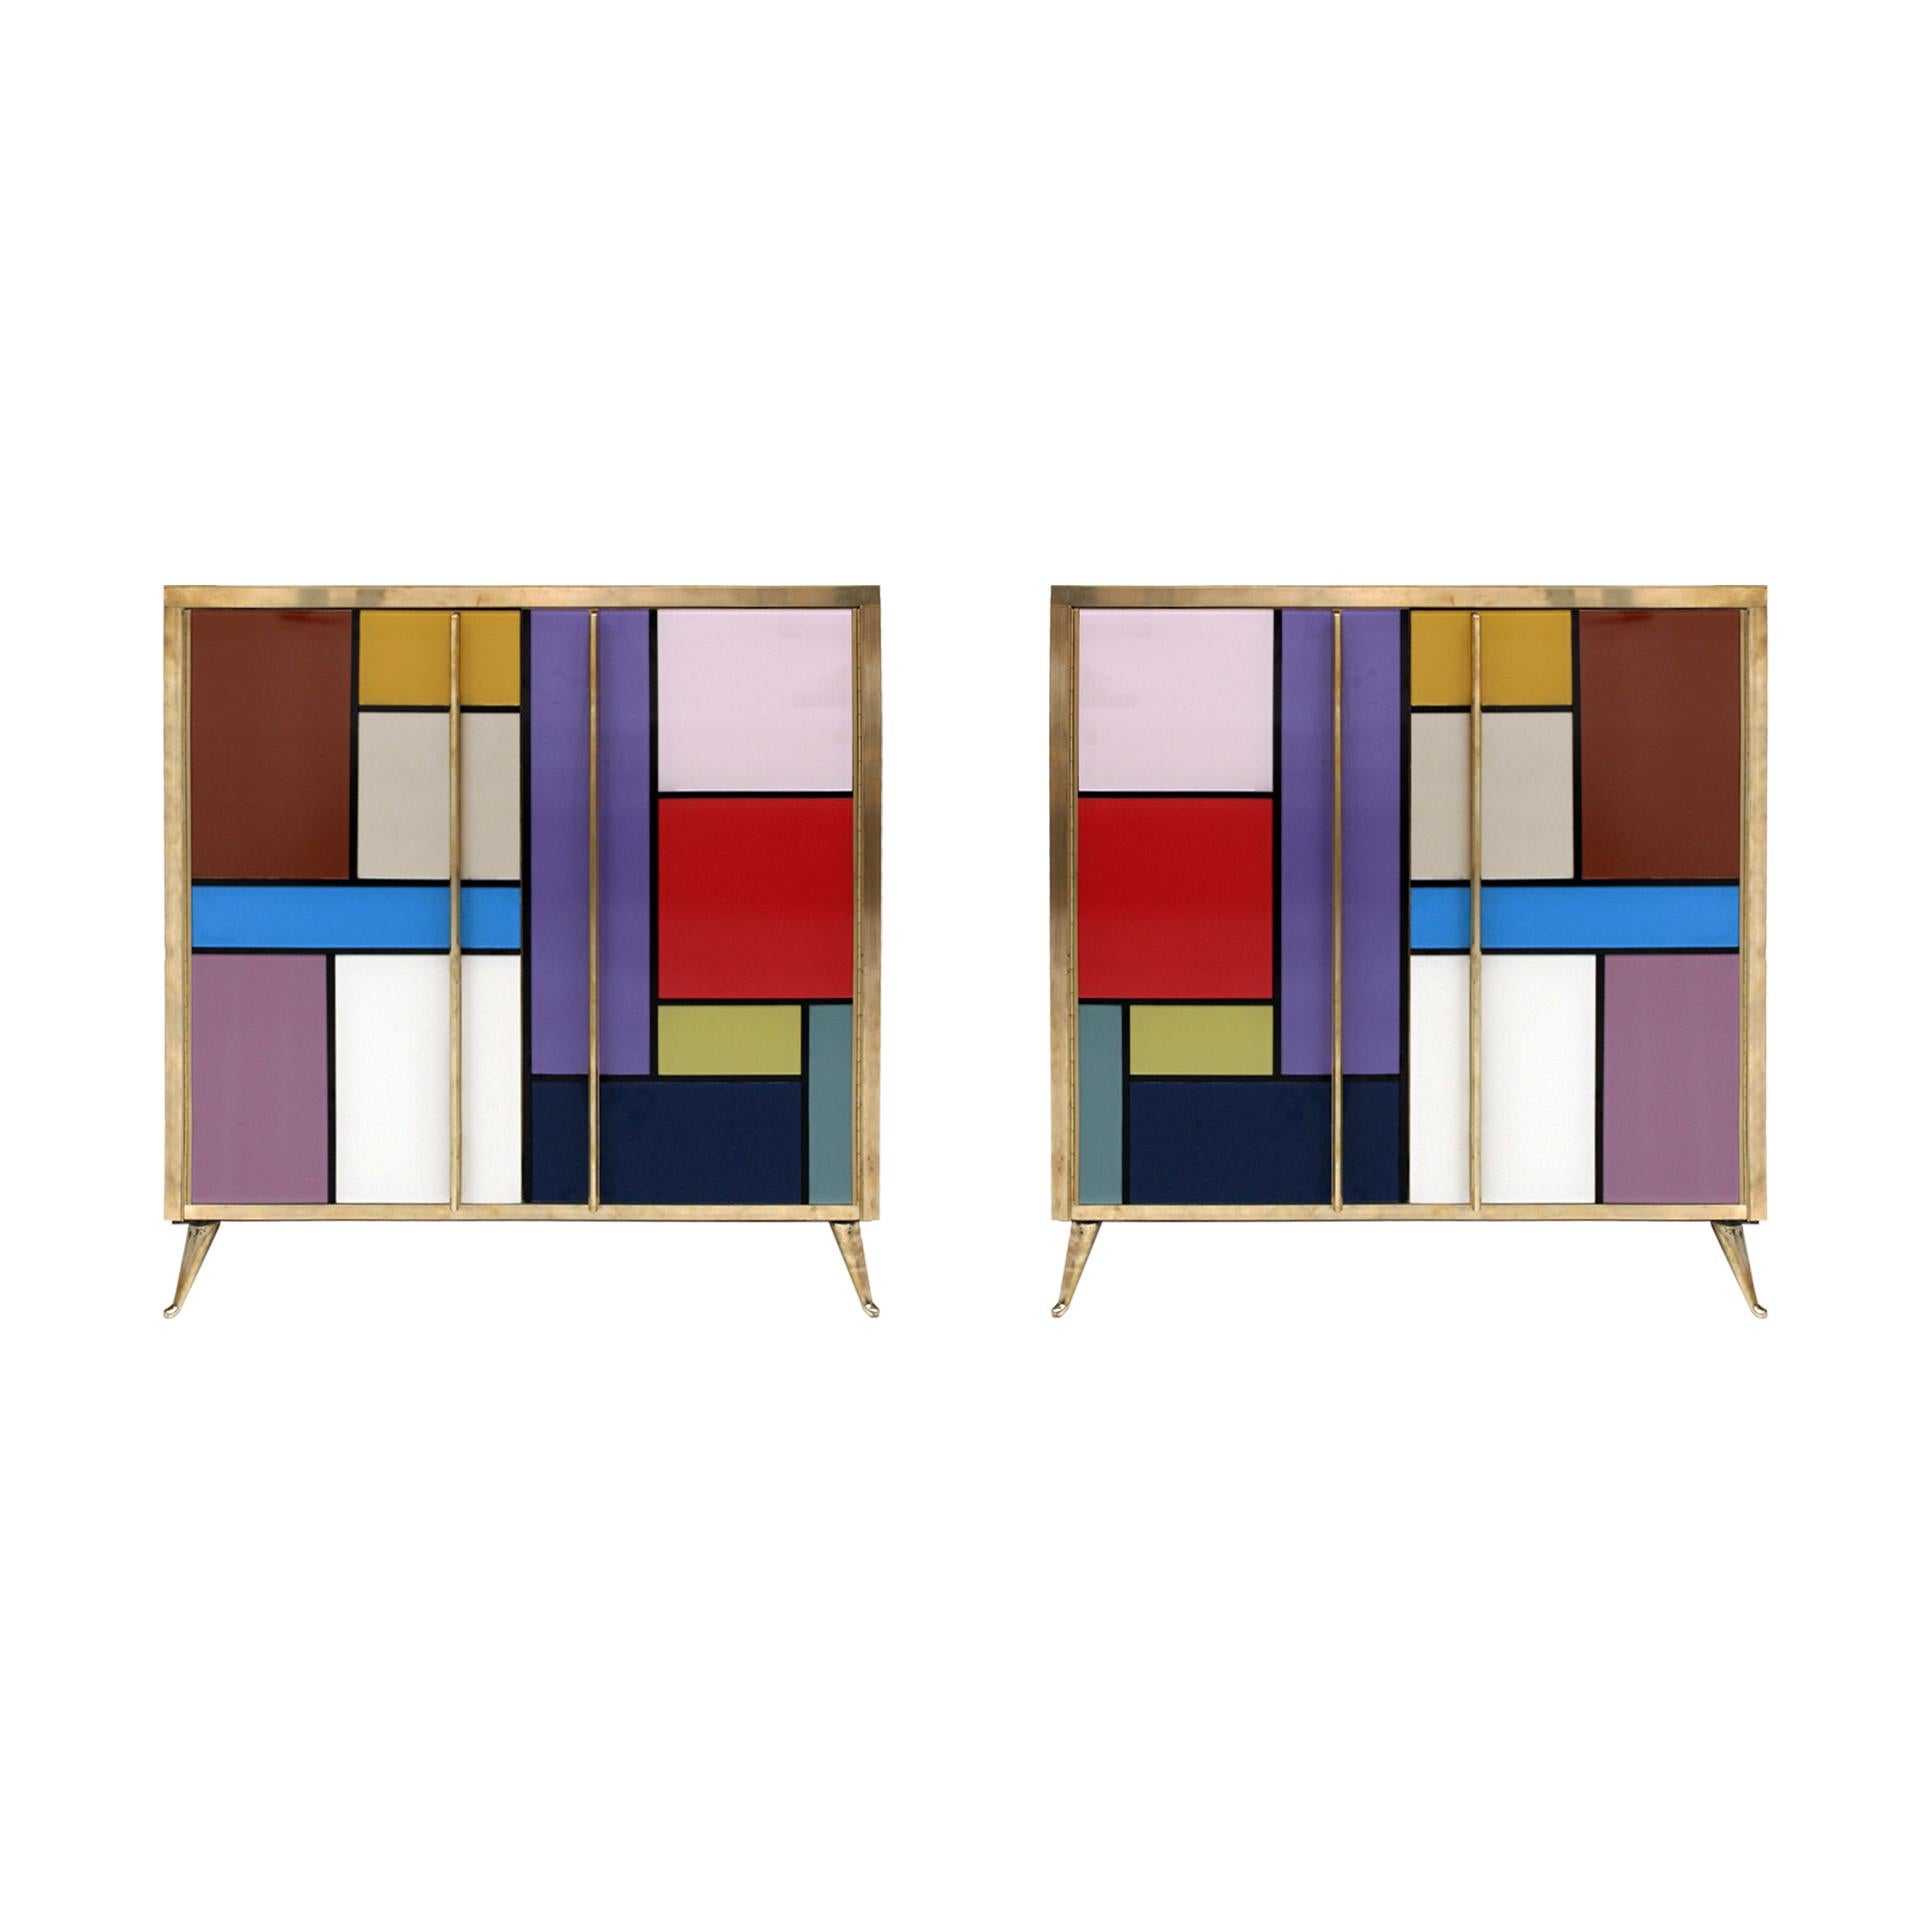 Pair of sideboards composed of two folding doors and one shelve inside. Original structure from 1950s made of solid wood and coated with colored glass. Details, handles and legs made of brass. 

Production time between 5 and 6 weeks.

Our main